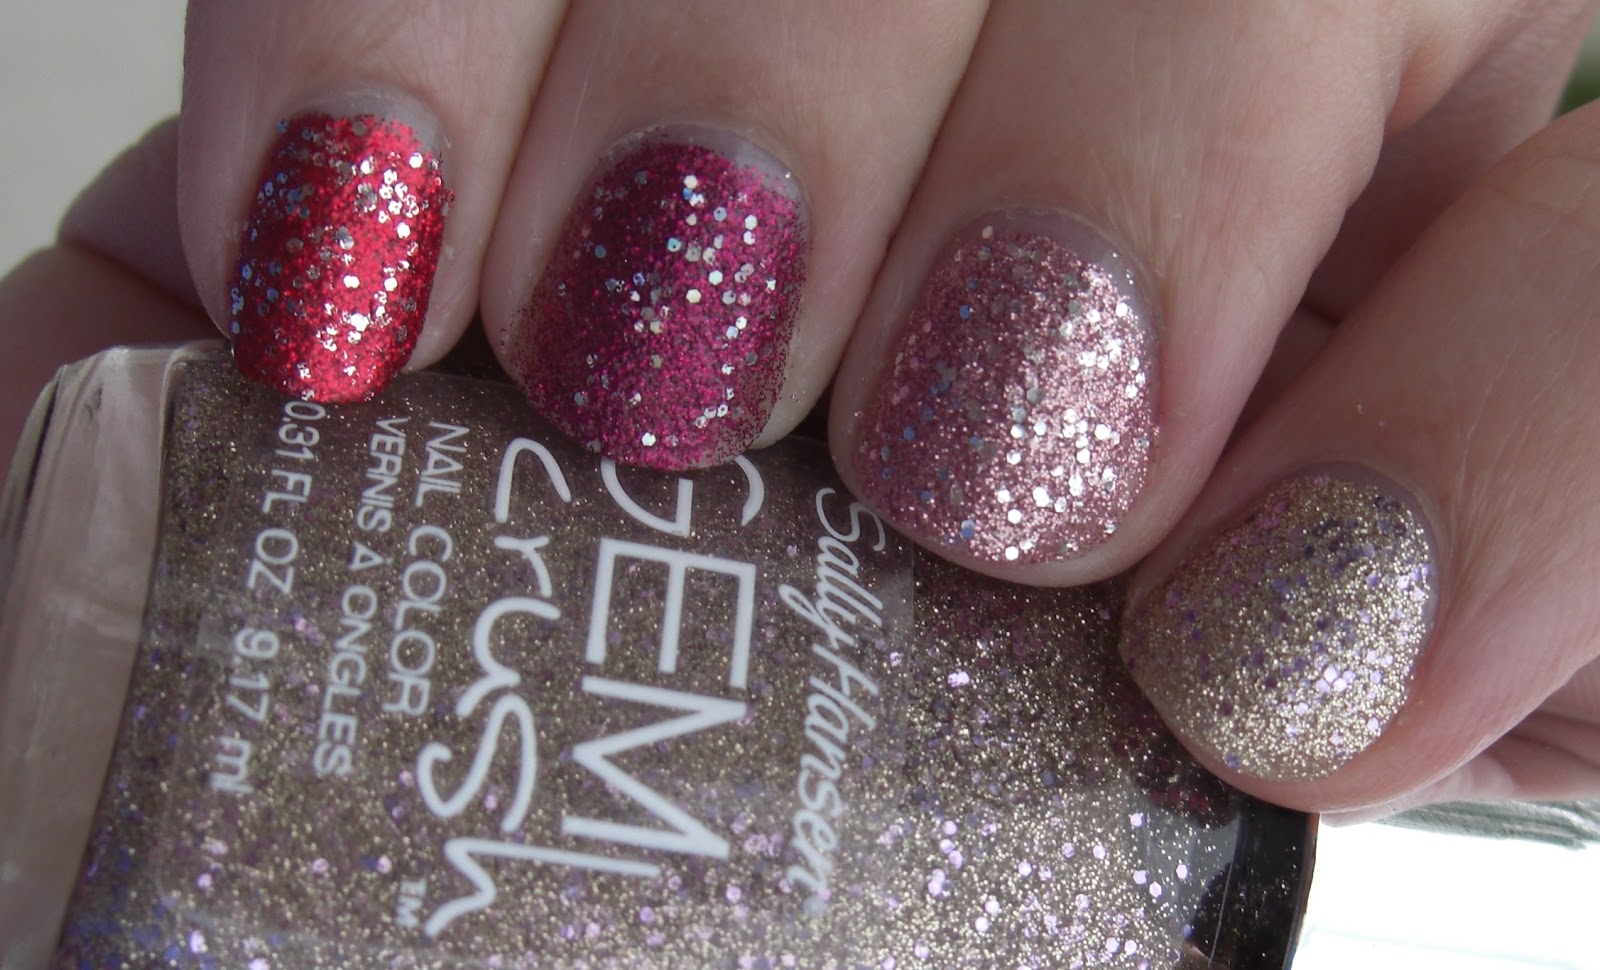 Gem Crush Nail Color Swatches - wide 8